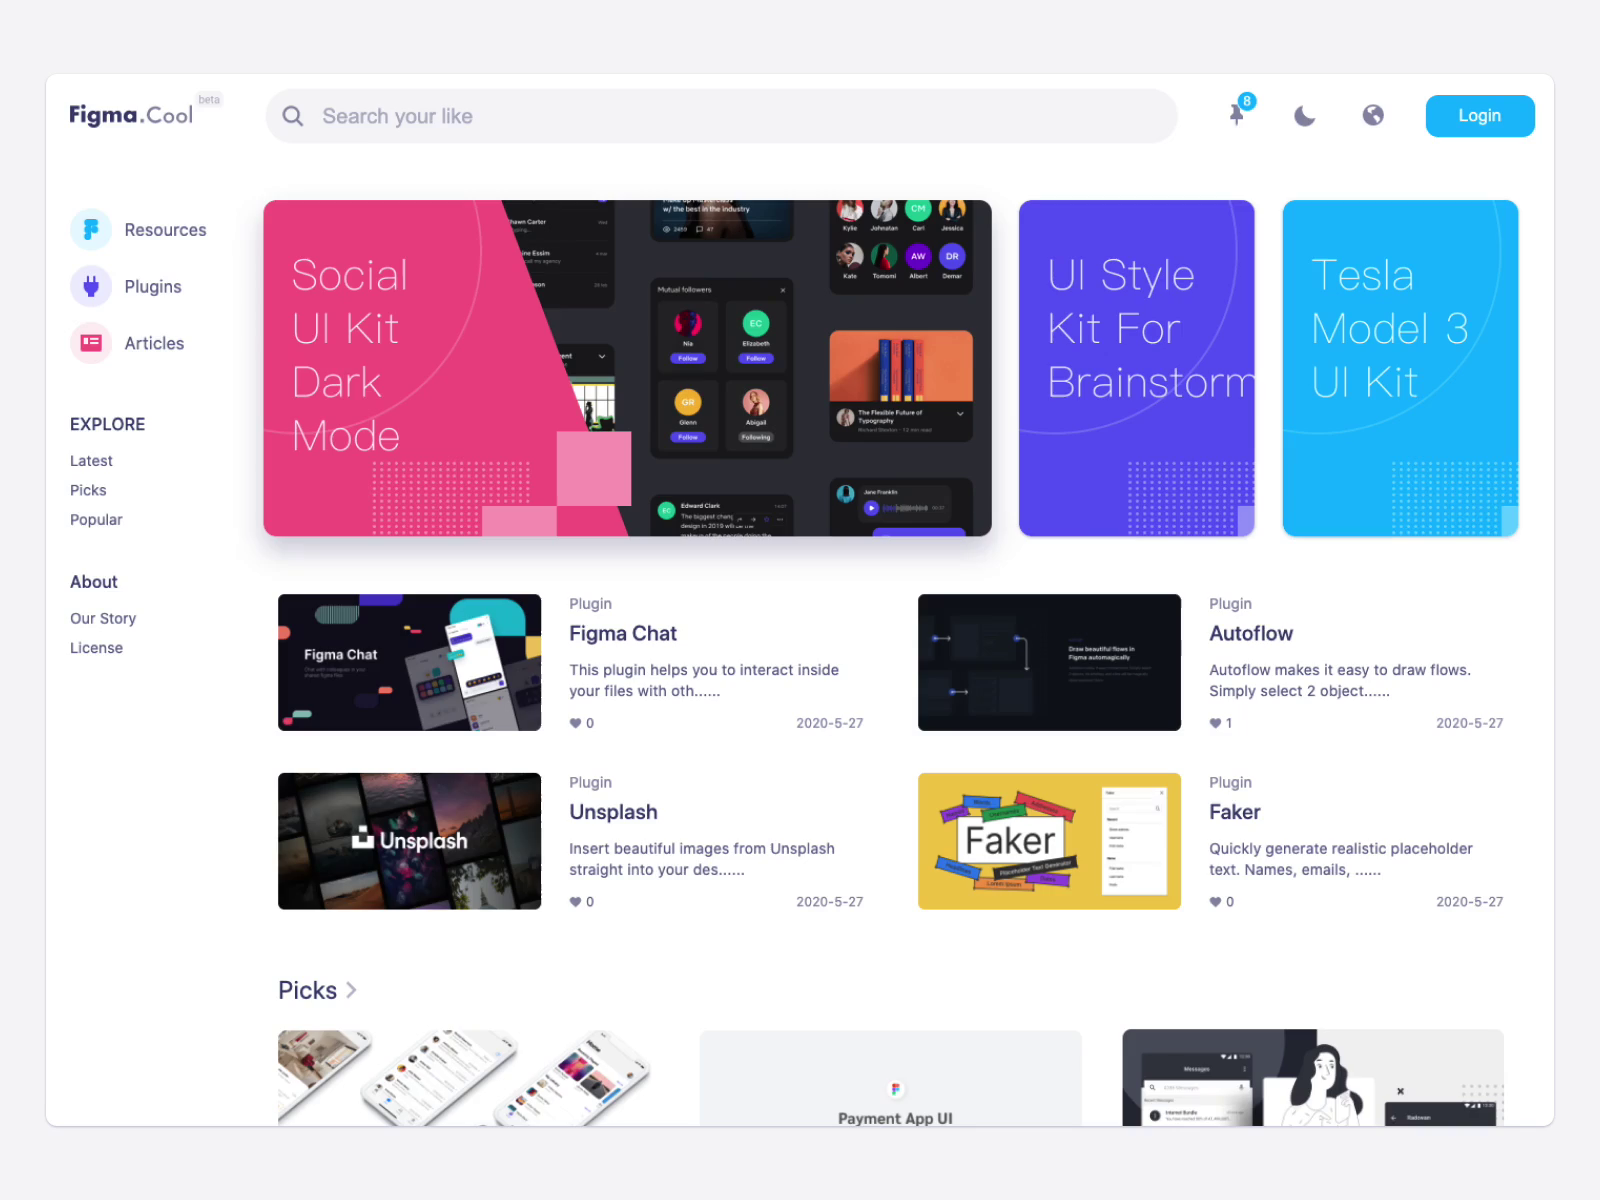 Introducing an allnew Stark for Figma Sketch Adobe XD and Chrome